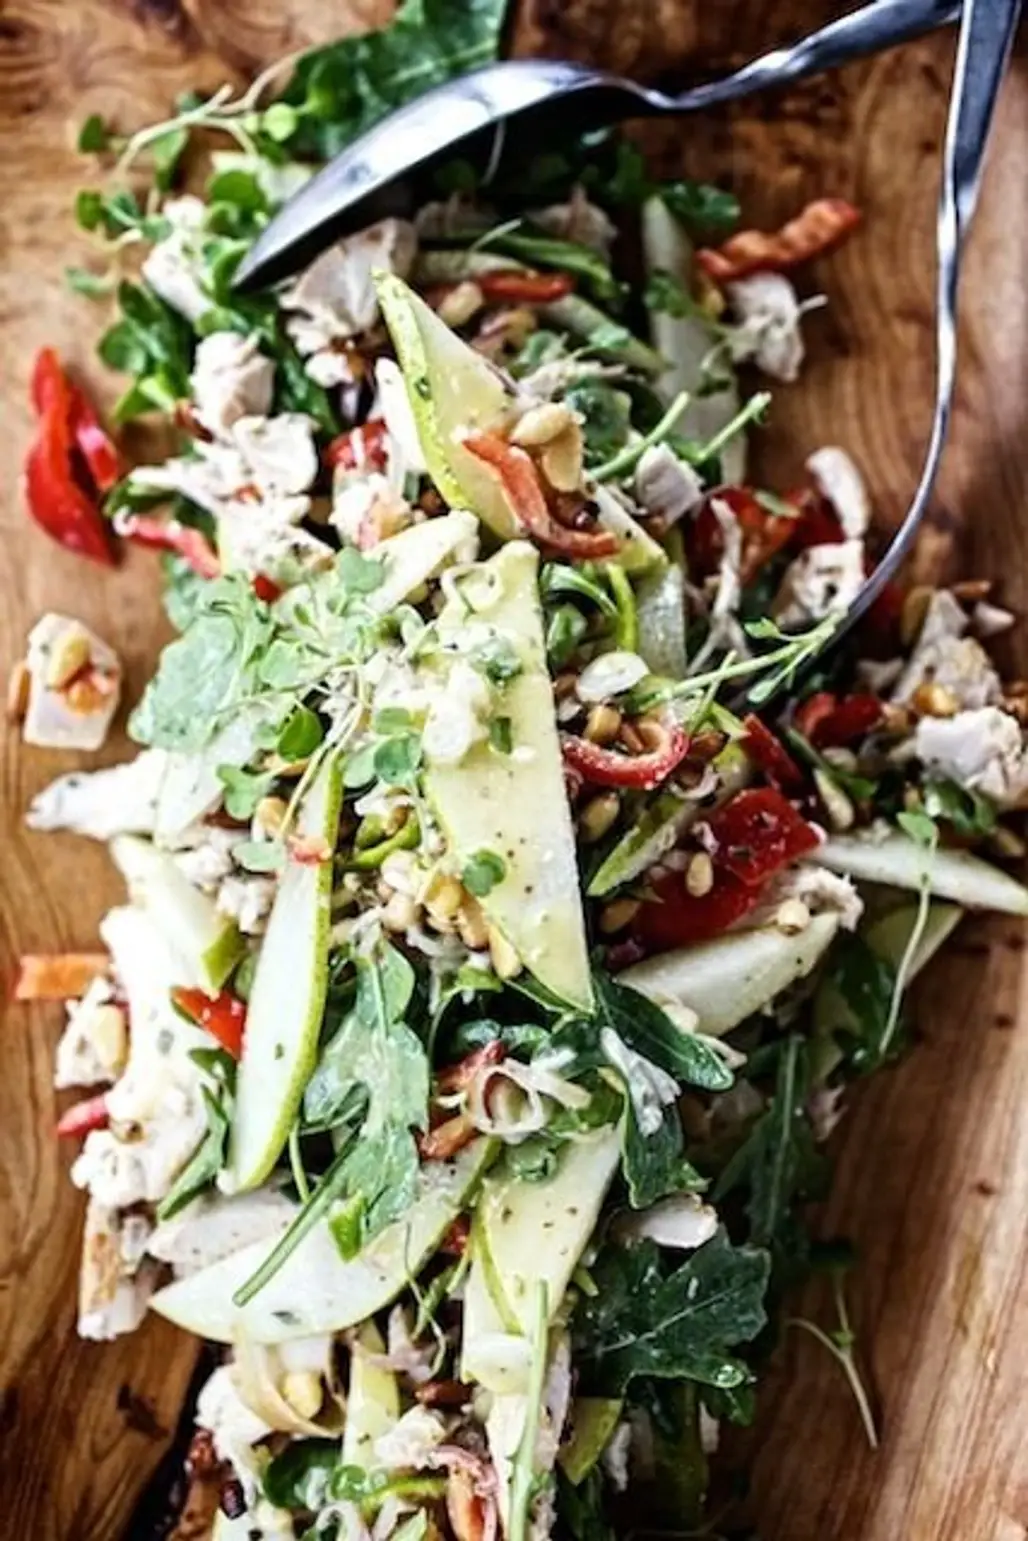 Warm Chicken Salad with Peppers, Pears & Toasted Pine Nuts